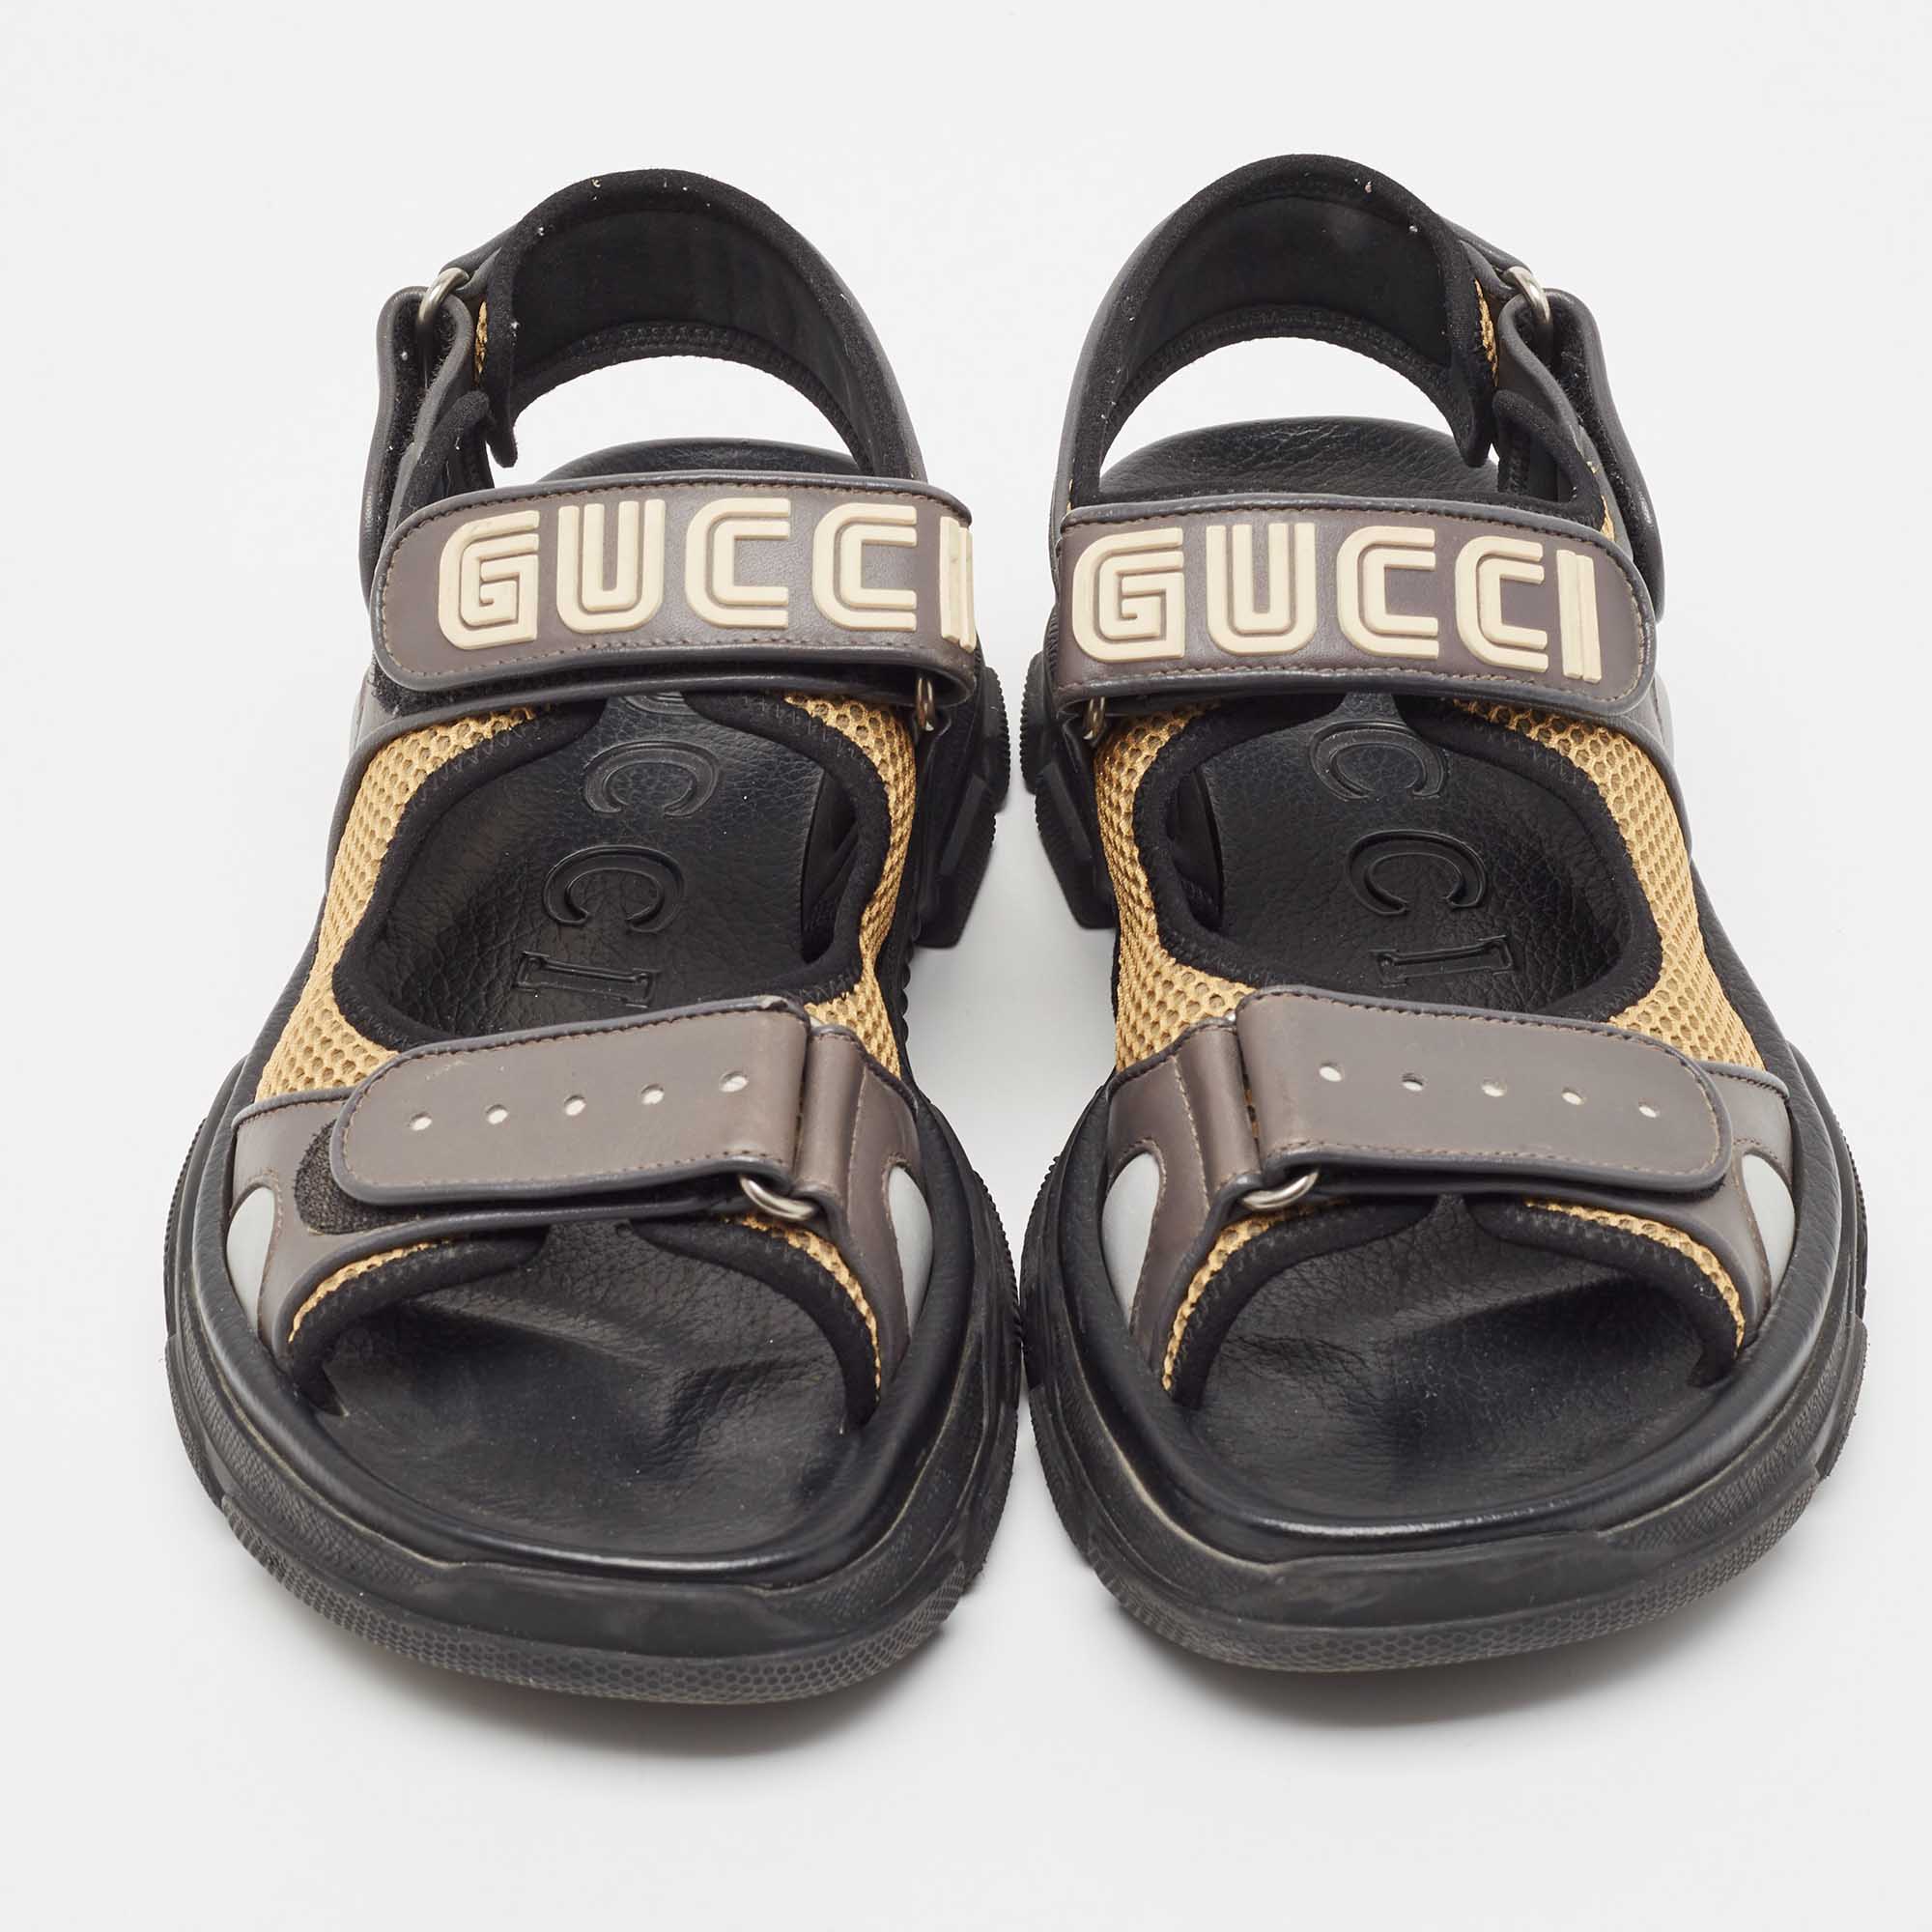 Gucci Grey/Beige Mesh And Leather Logo Sandals Size 41.5